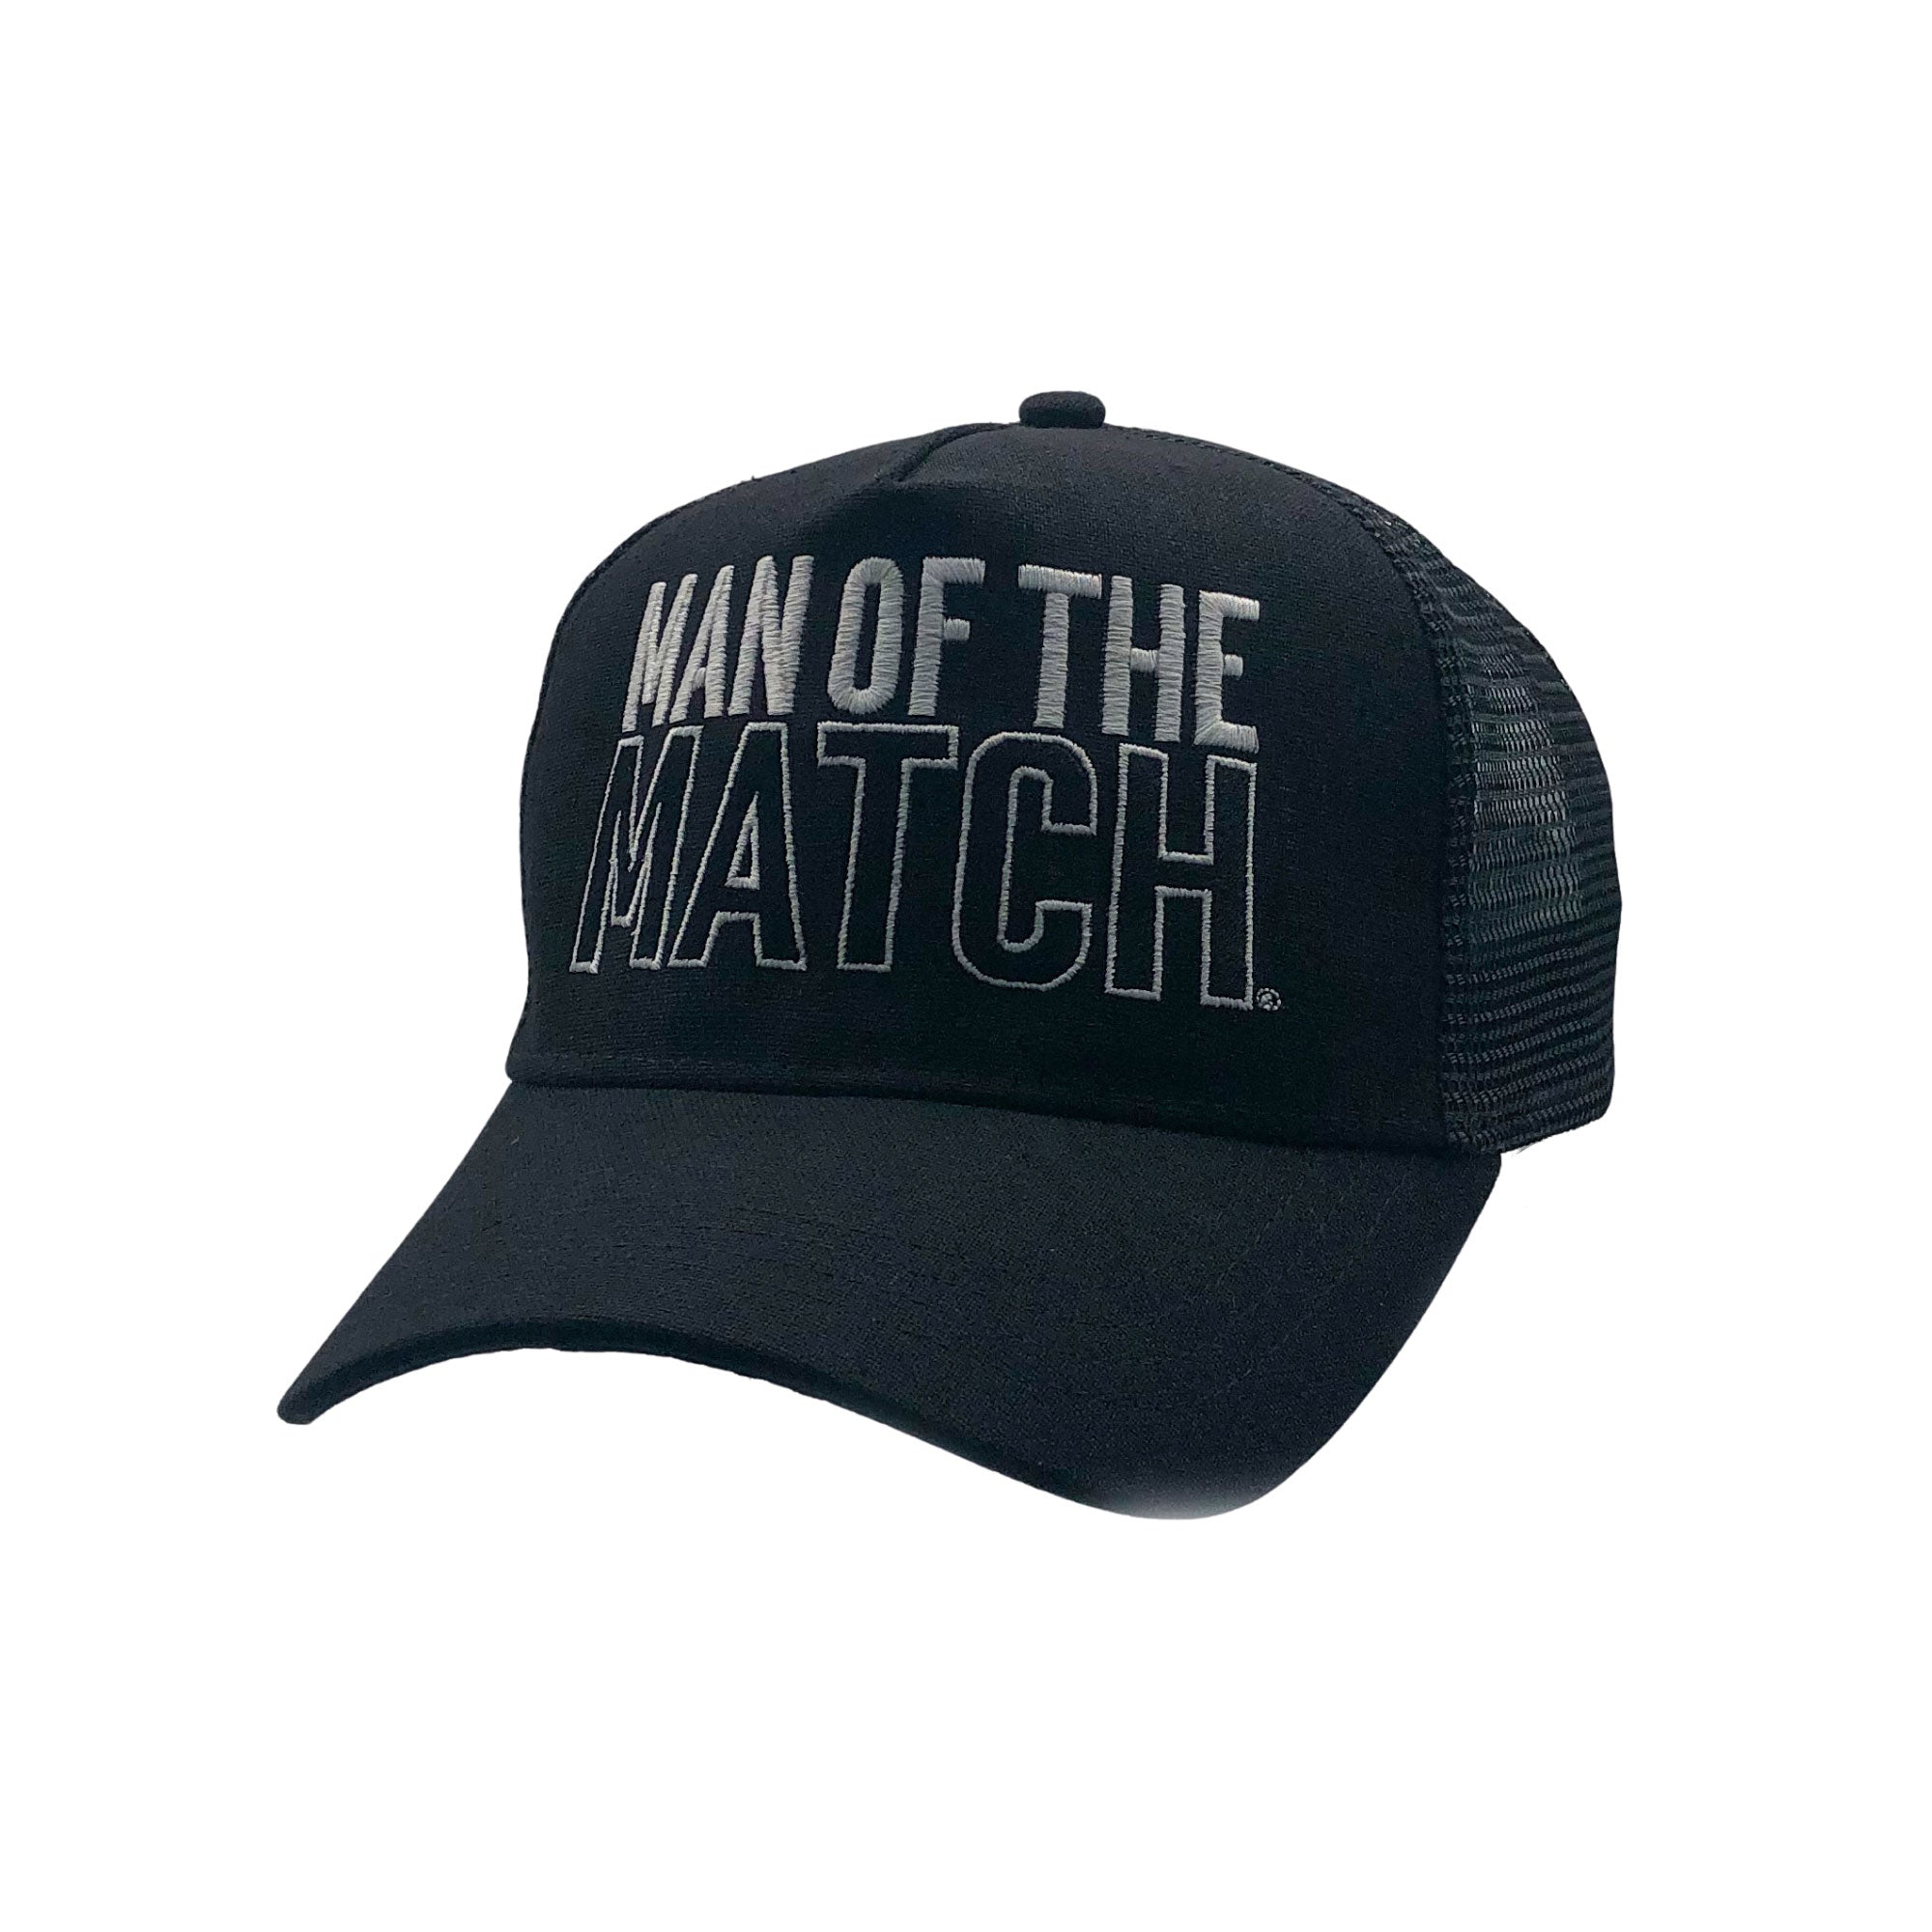 MAN OF THE MATCH® Official Cap - Embroidered White on Black - Premium Linen